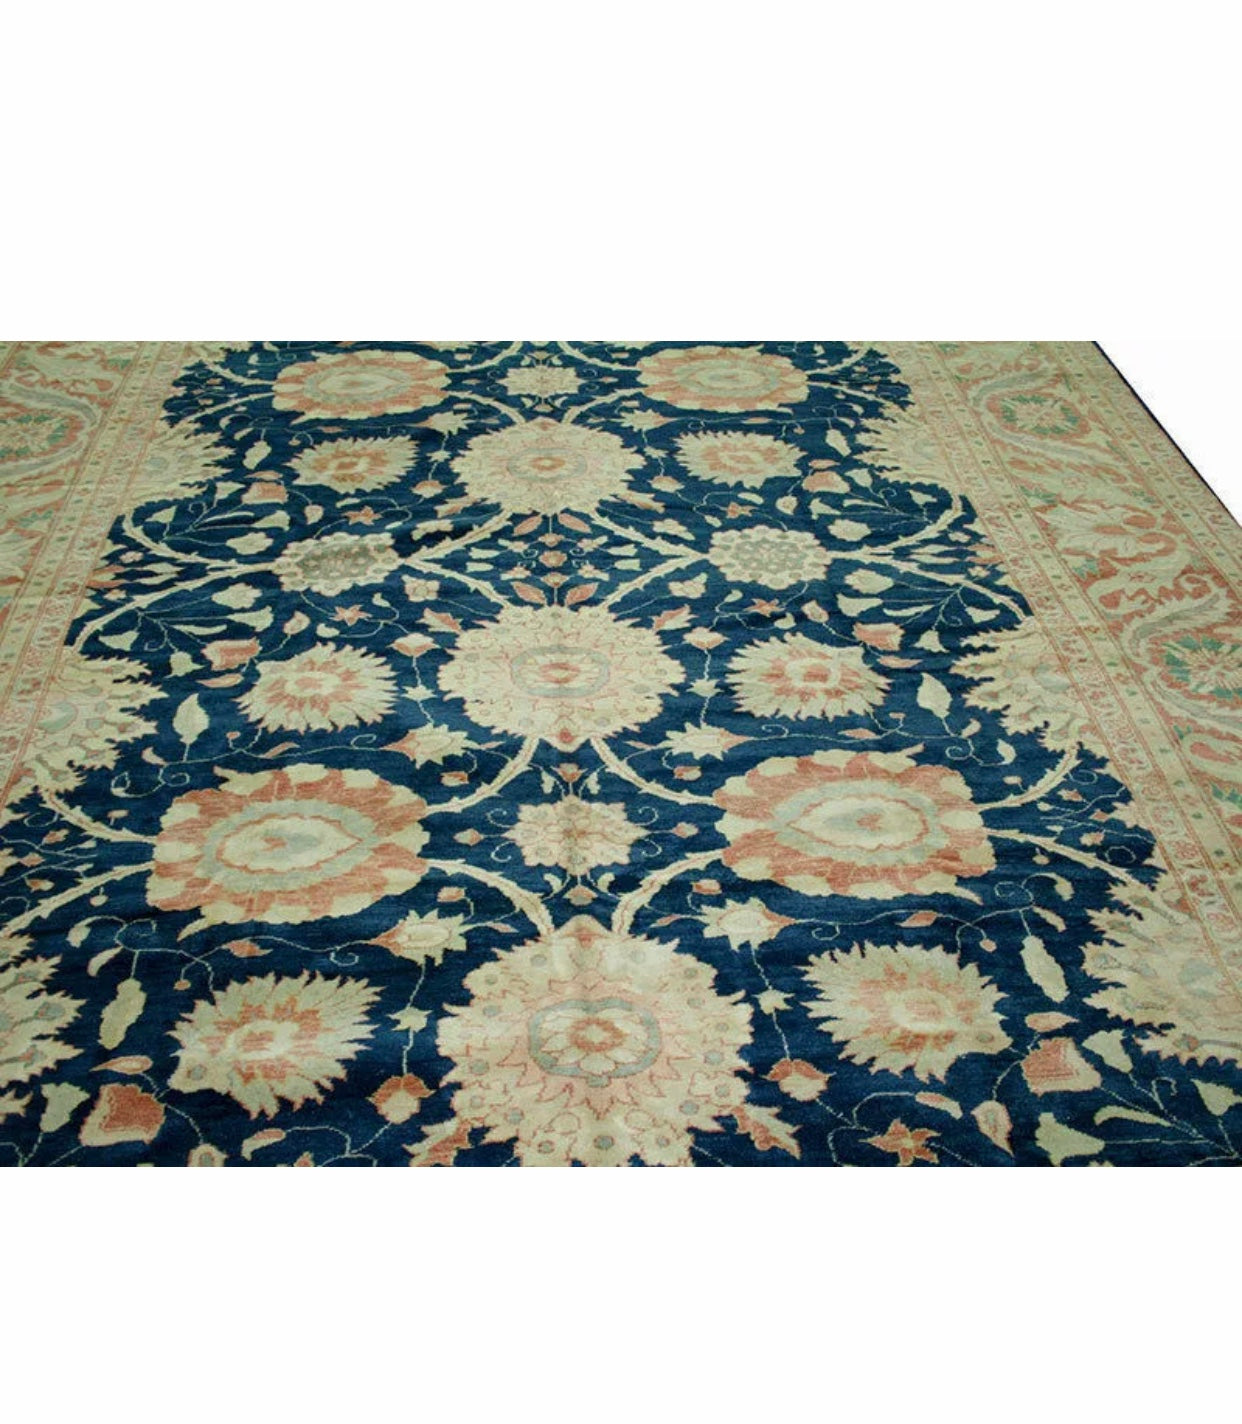 A Gorgeous Egyptian Rug with Persian Sultanabad Inspired